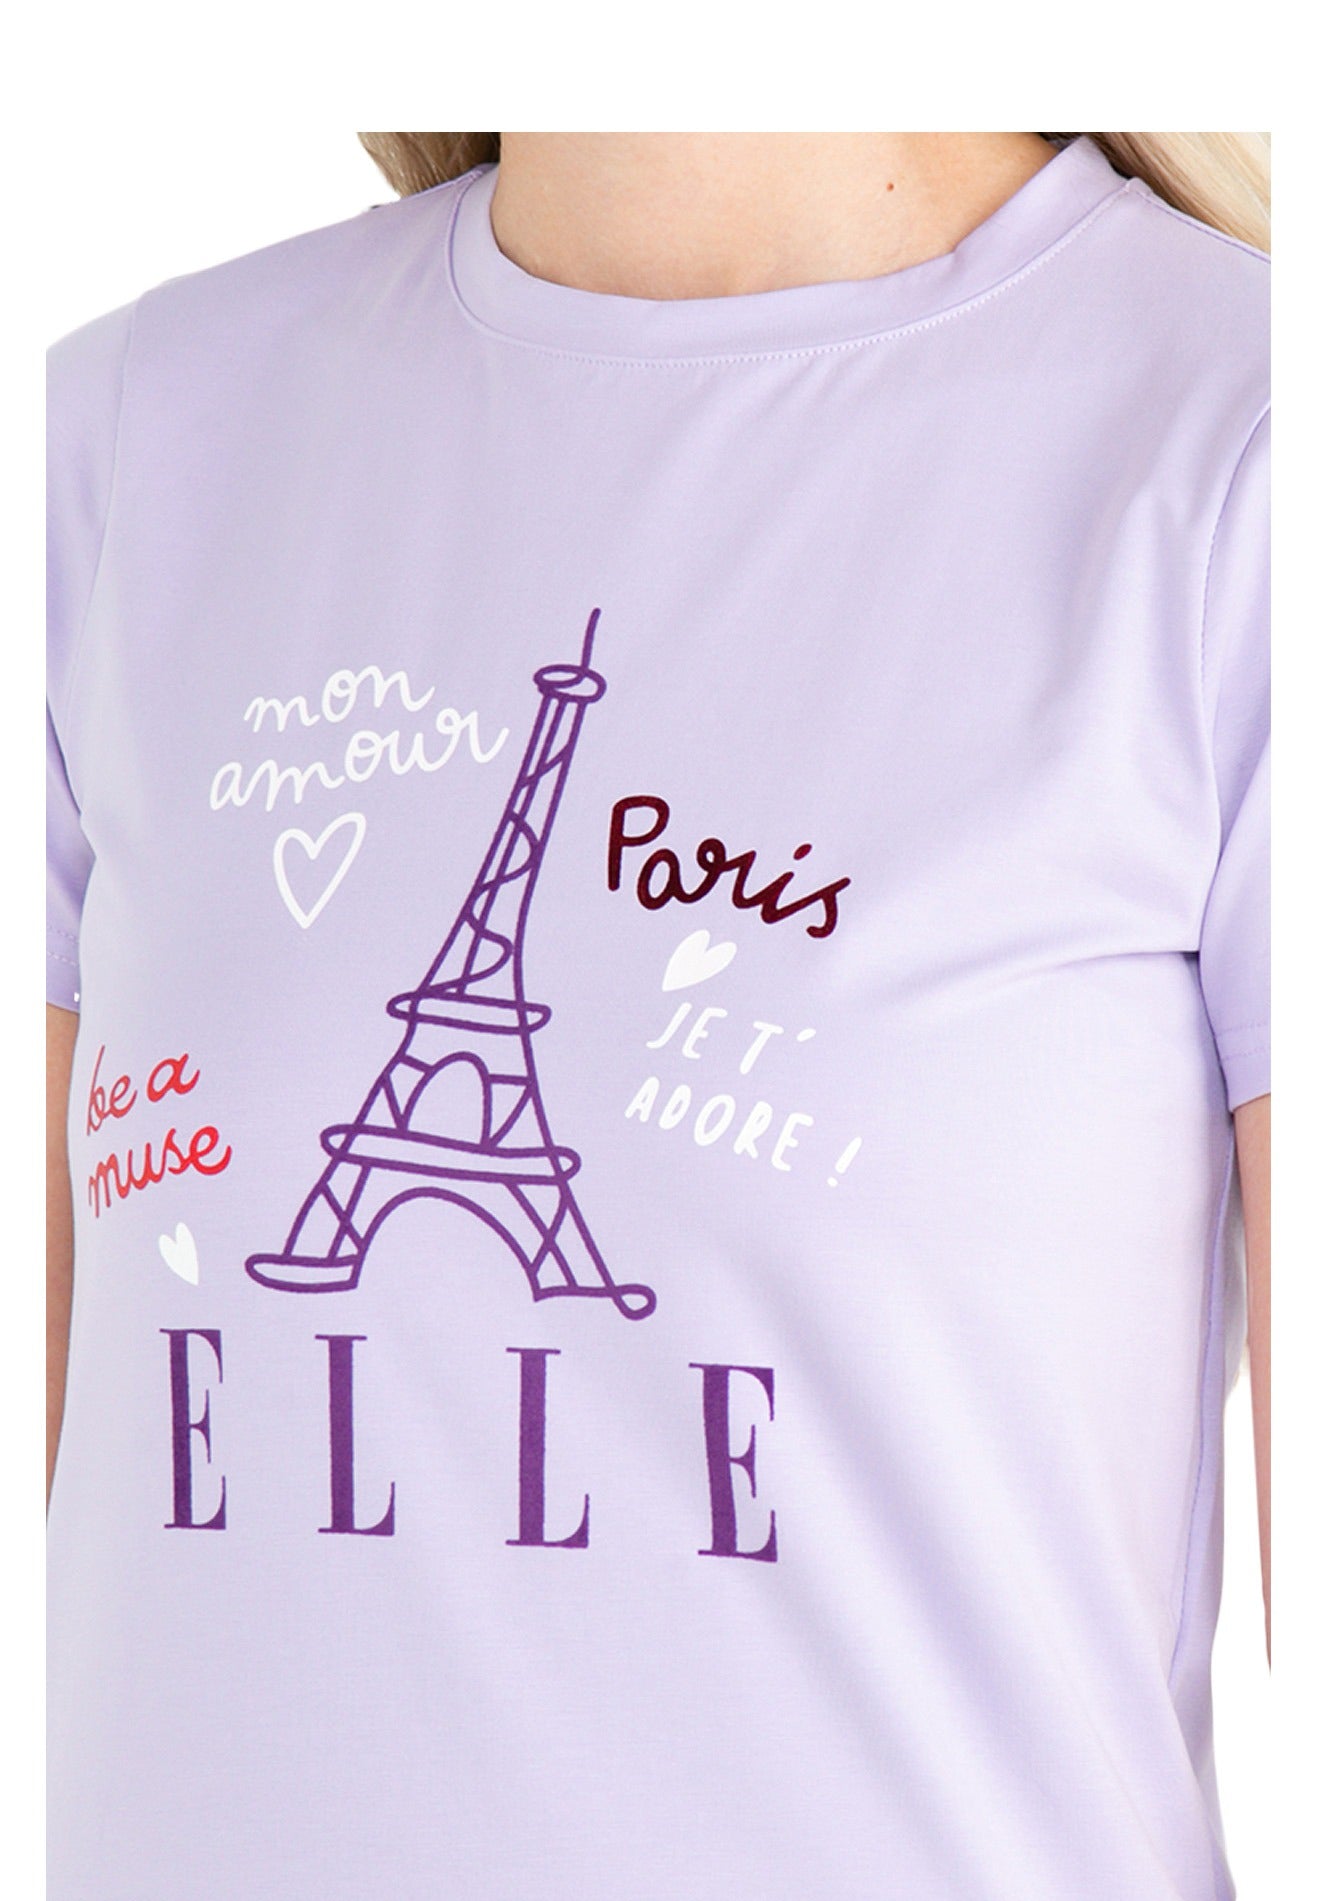 ELLE Active Leisure Eiffel Tower With Basic Logo Tee